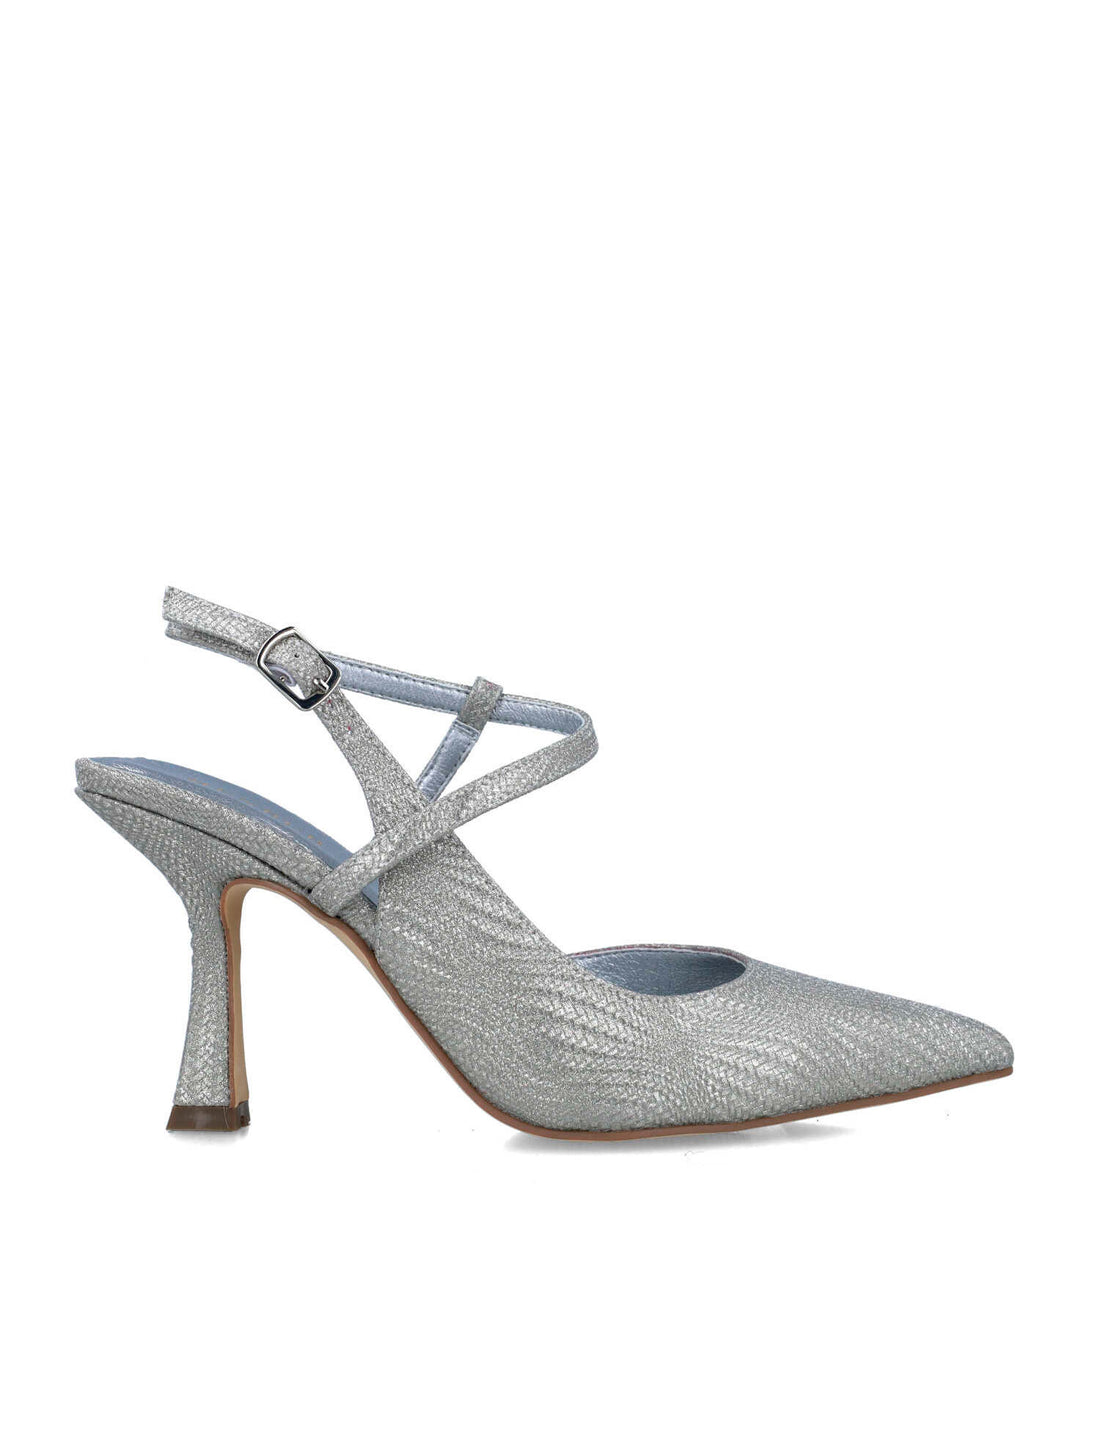 Shimmery Silver Pumps With Ankle Strap_25274_09_01